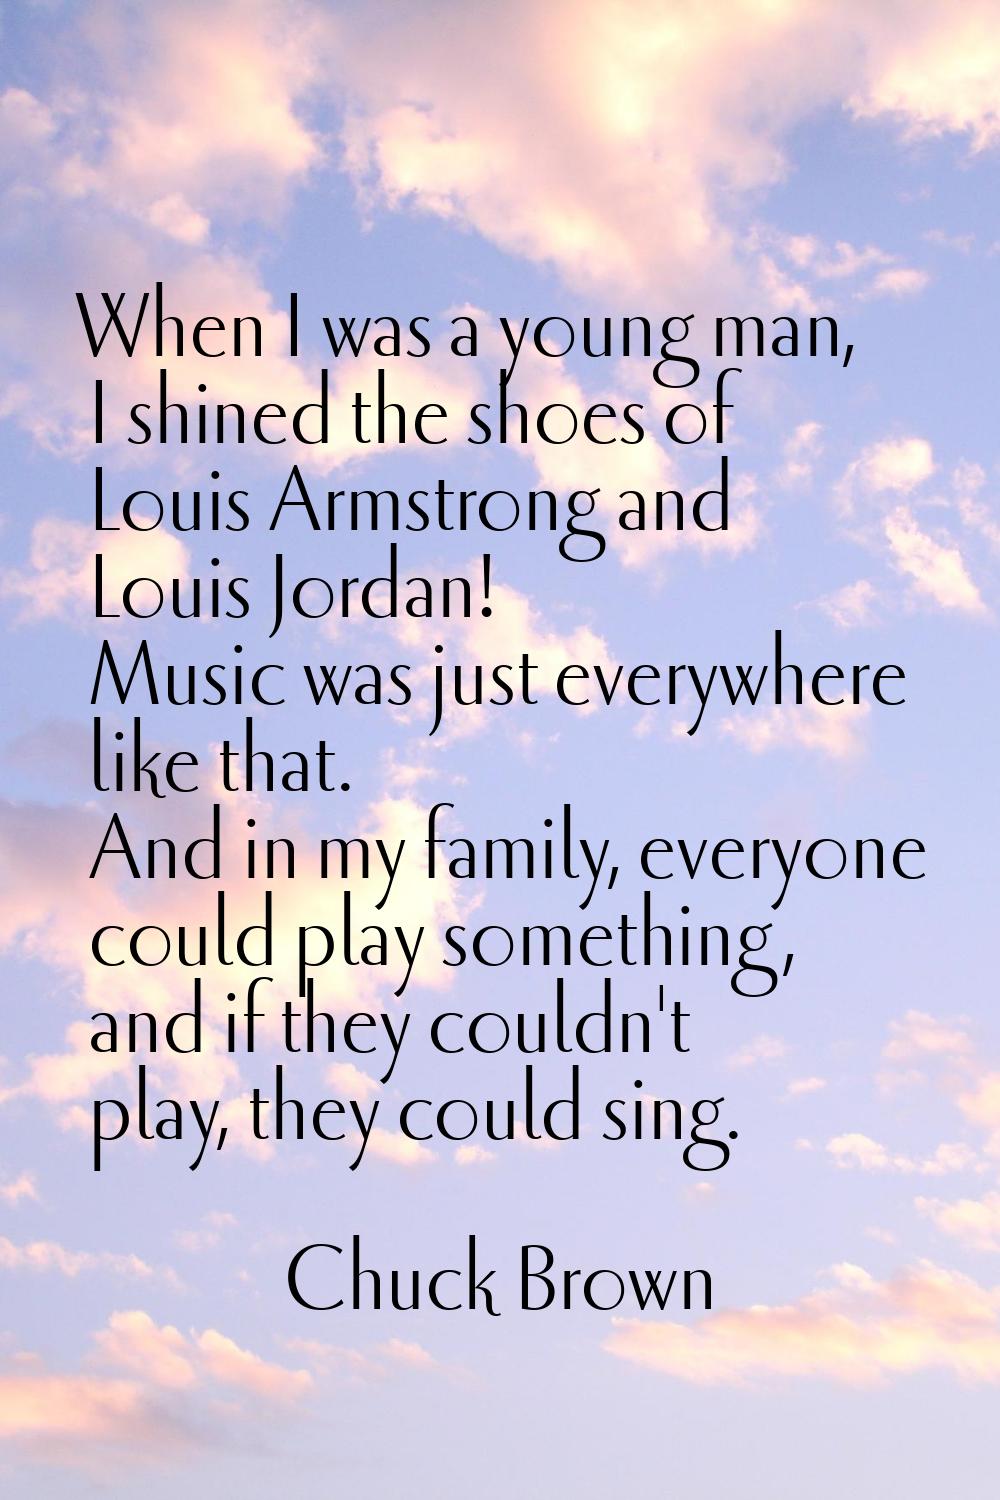 When I was a young man, I shined the shoes of Louis Armstrong and Louis Jordan! Music was just ever